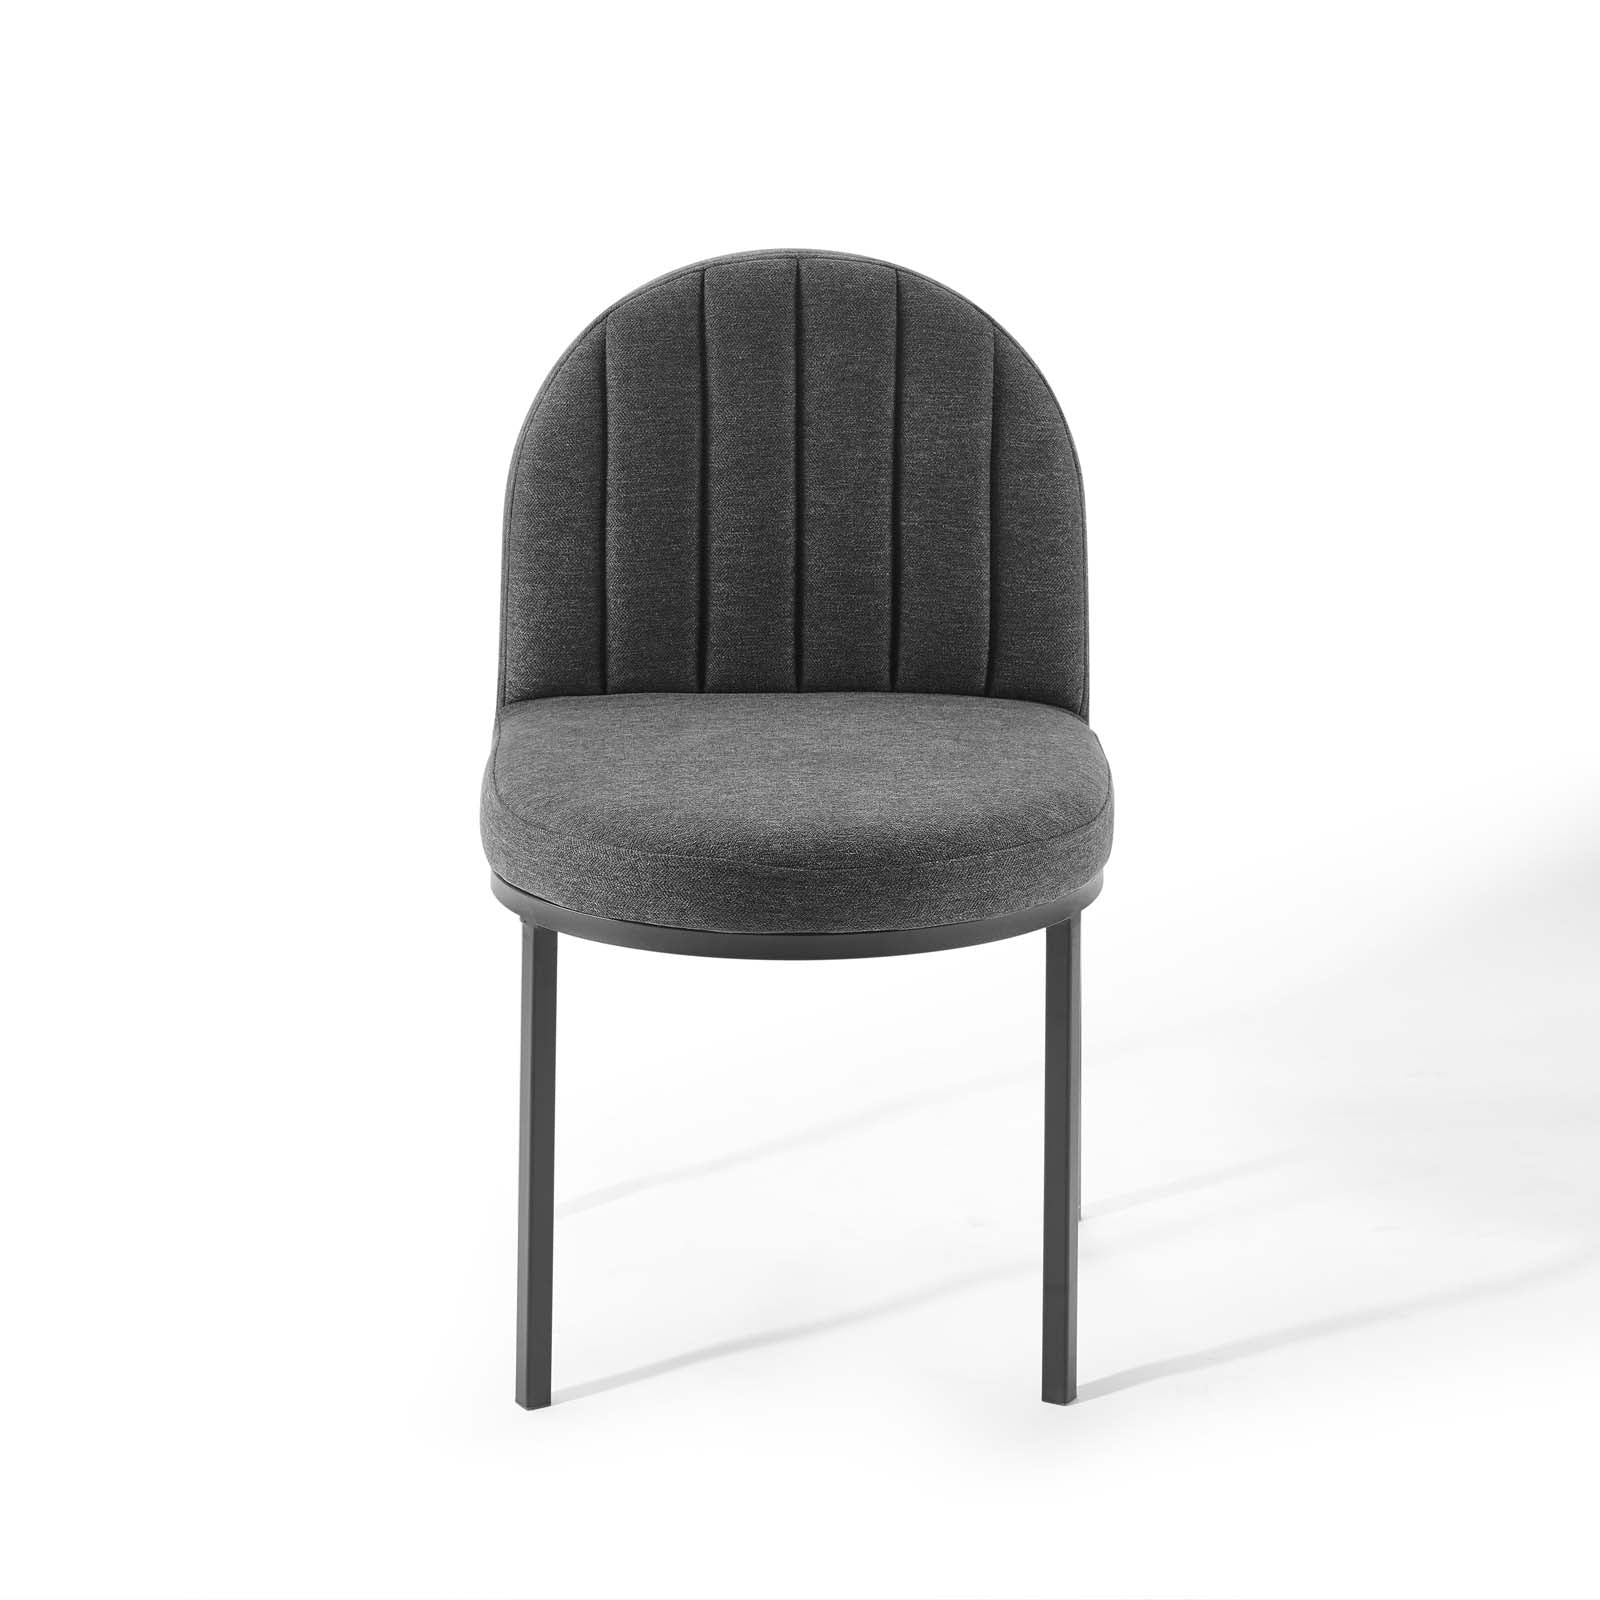 Modway Dining Chairs - Isla Channel Tufted Upholstered Fabric Dining Side Chair Black Charcoal